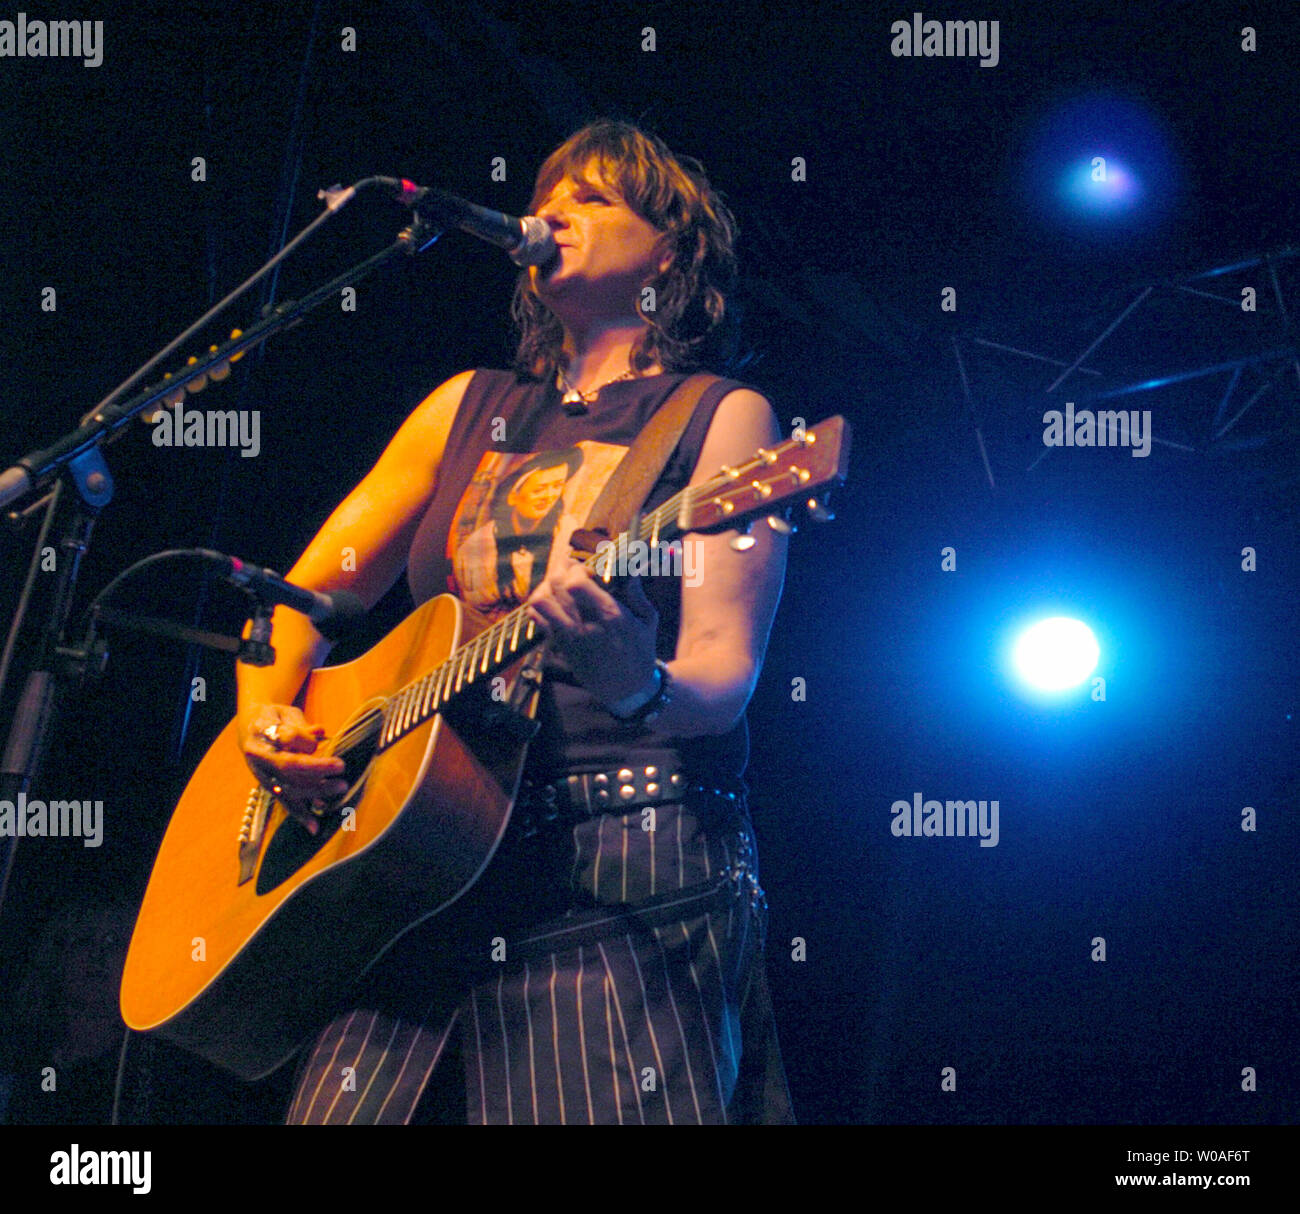 Amy Ray of American folk rock duo the Indigo Girls performs onstage in the heart of the gay village as part of the Pride Toronto festivities in downtown Toronto, Canada on June 23, 2007. Ray and songwriting partner Emily Saliers, icons of the gay community, are in town headlining a series of free concerts held during one of the world's largest pride celebrations.(UPI Photo/Christine Chew) Stock Photo